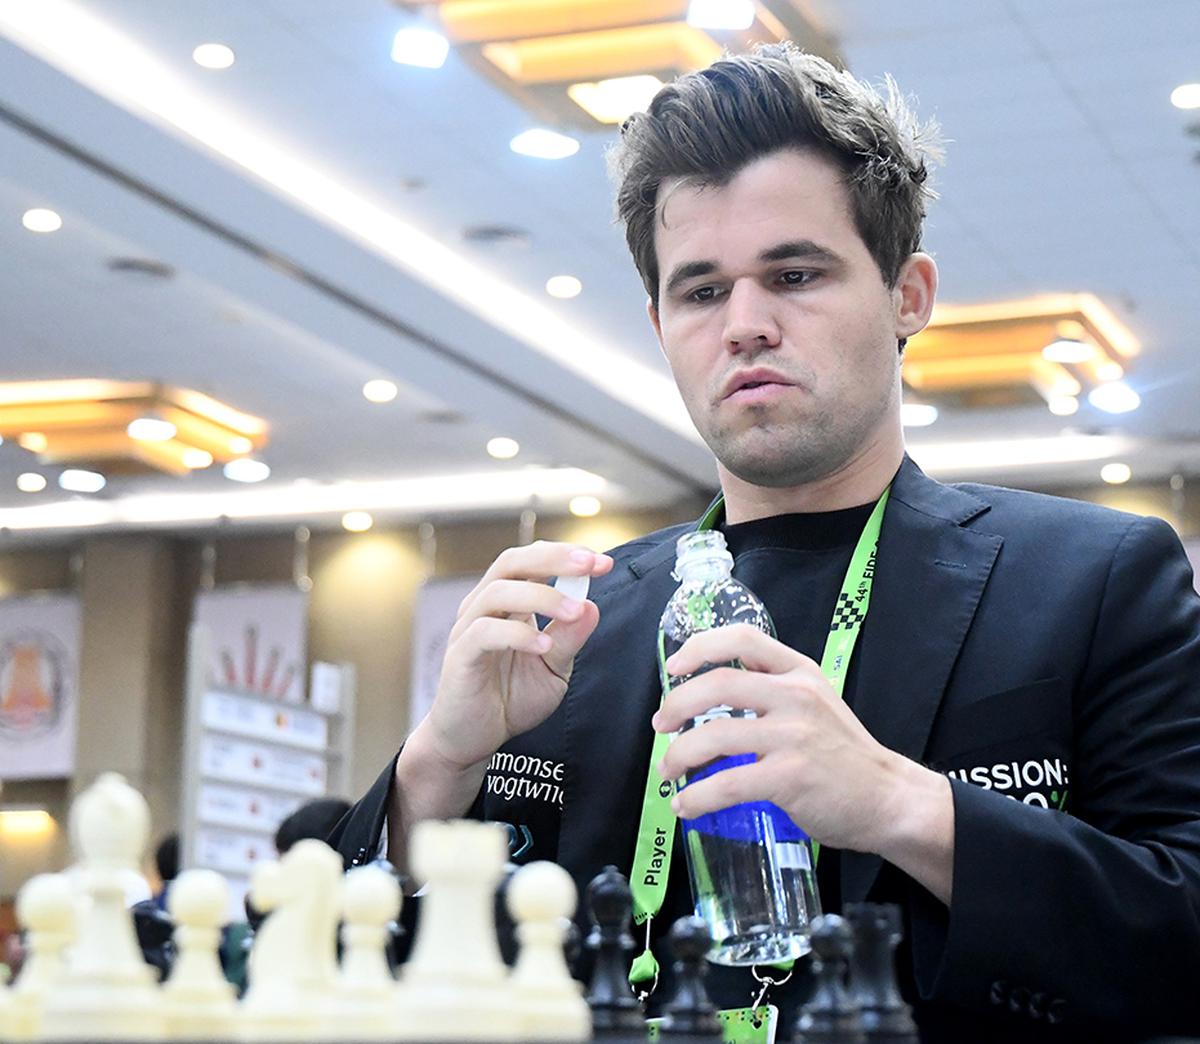 Chess Olympiad: Magnus Carlsen Is Still on Top of His Game - The New York  Times